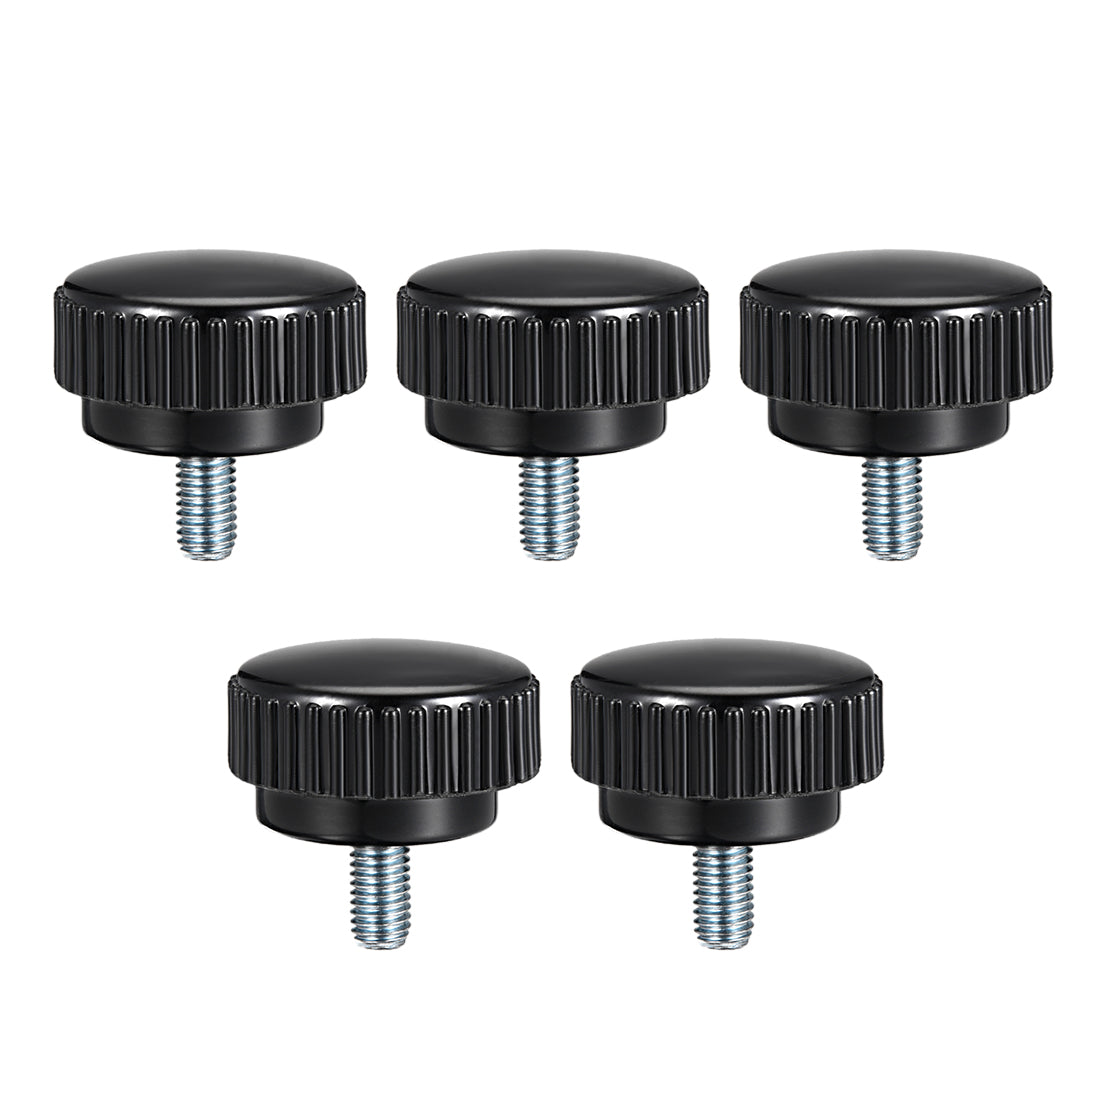 Uxcell Uxcell M8 x 20mm Male Thread Knurled Clamping Knobs Grip Thumb Screw on Type  5 Pcs